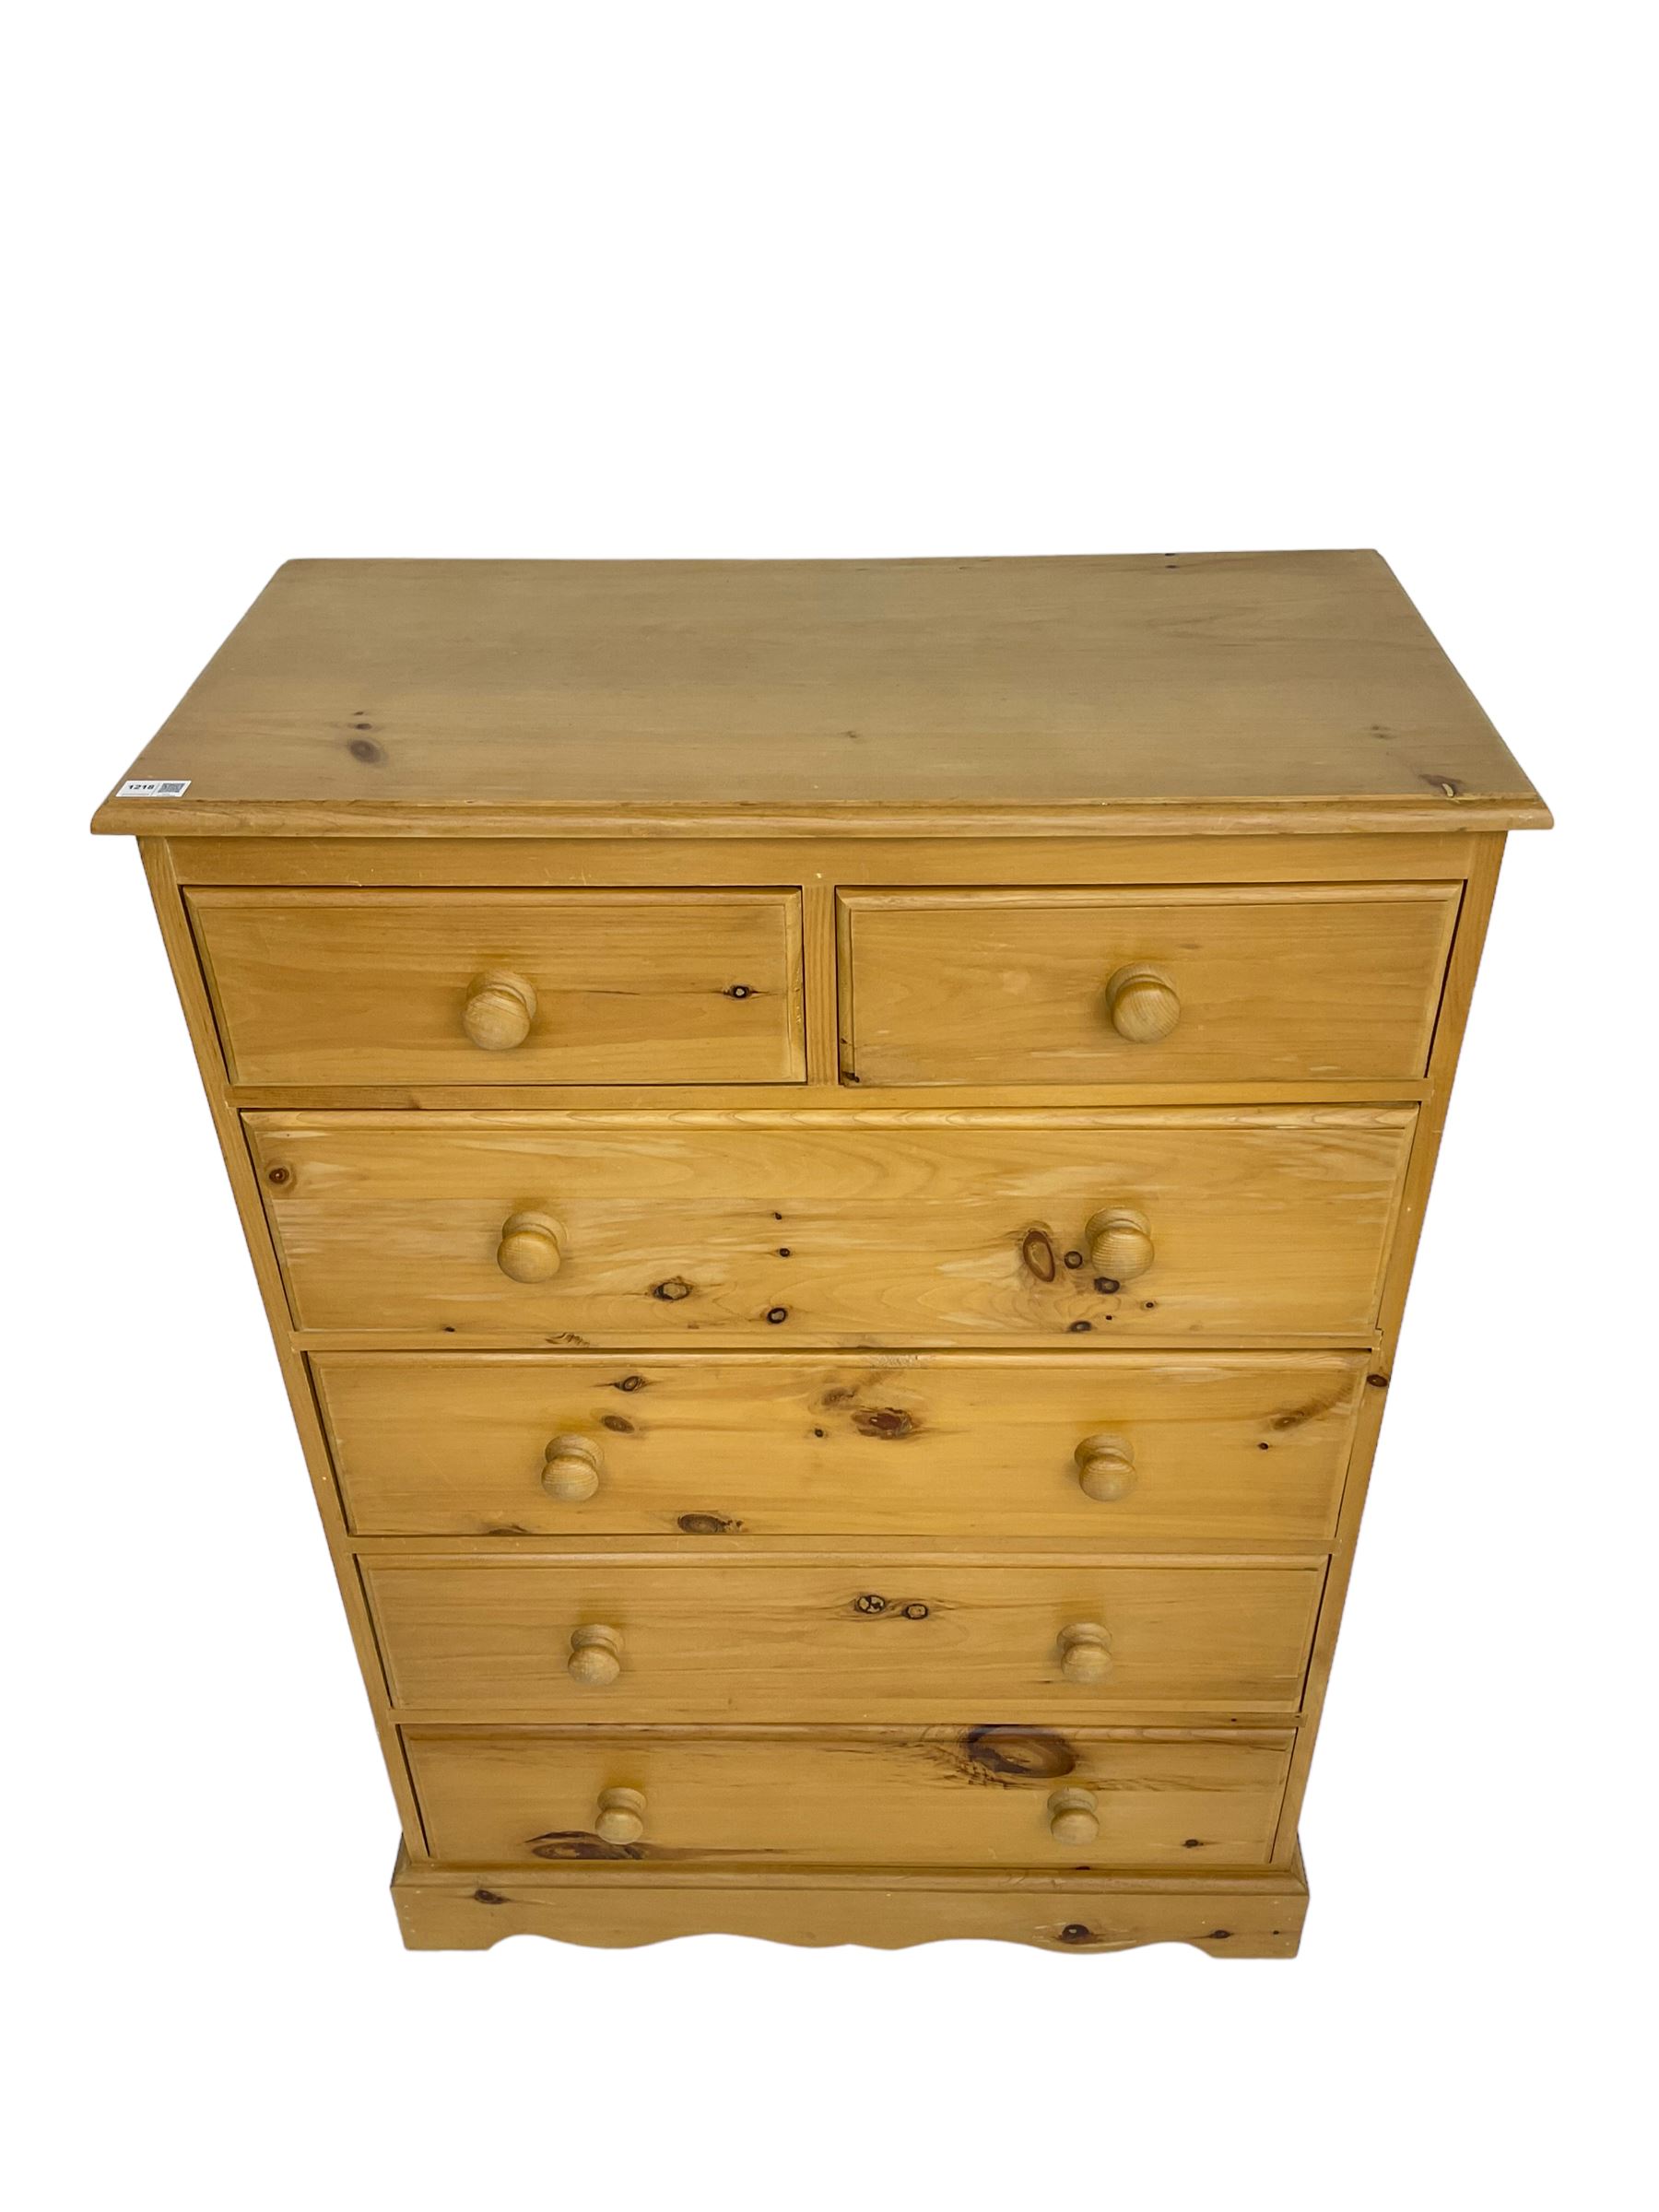 Traditional pine chest - Image 6 of 7